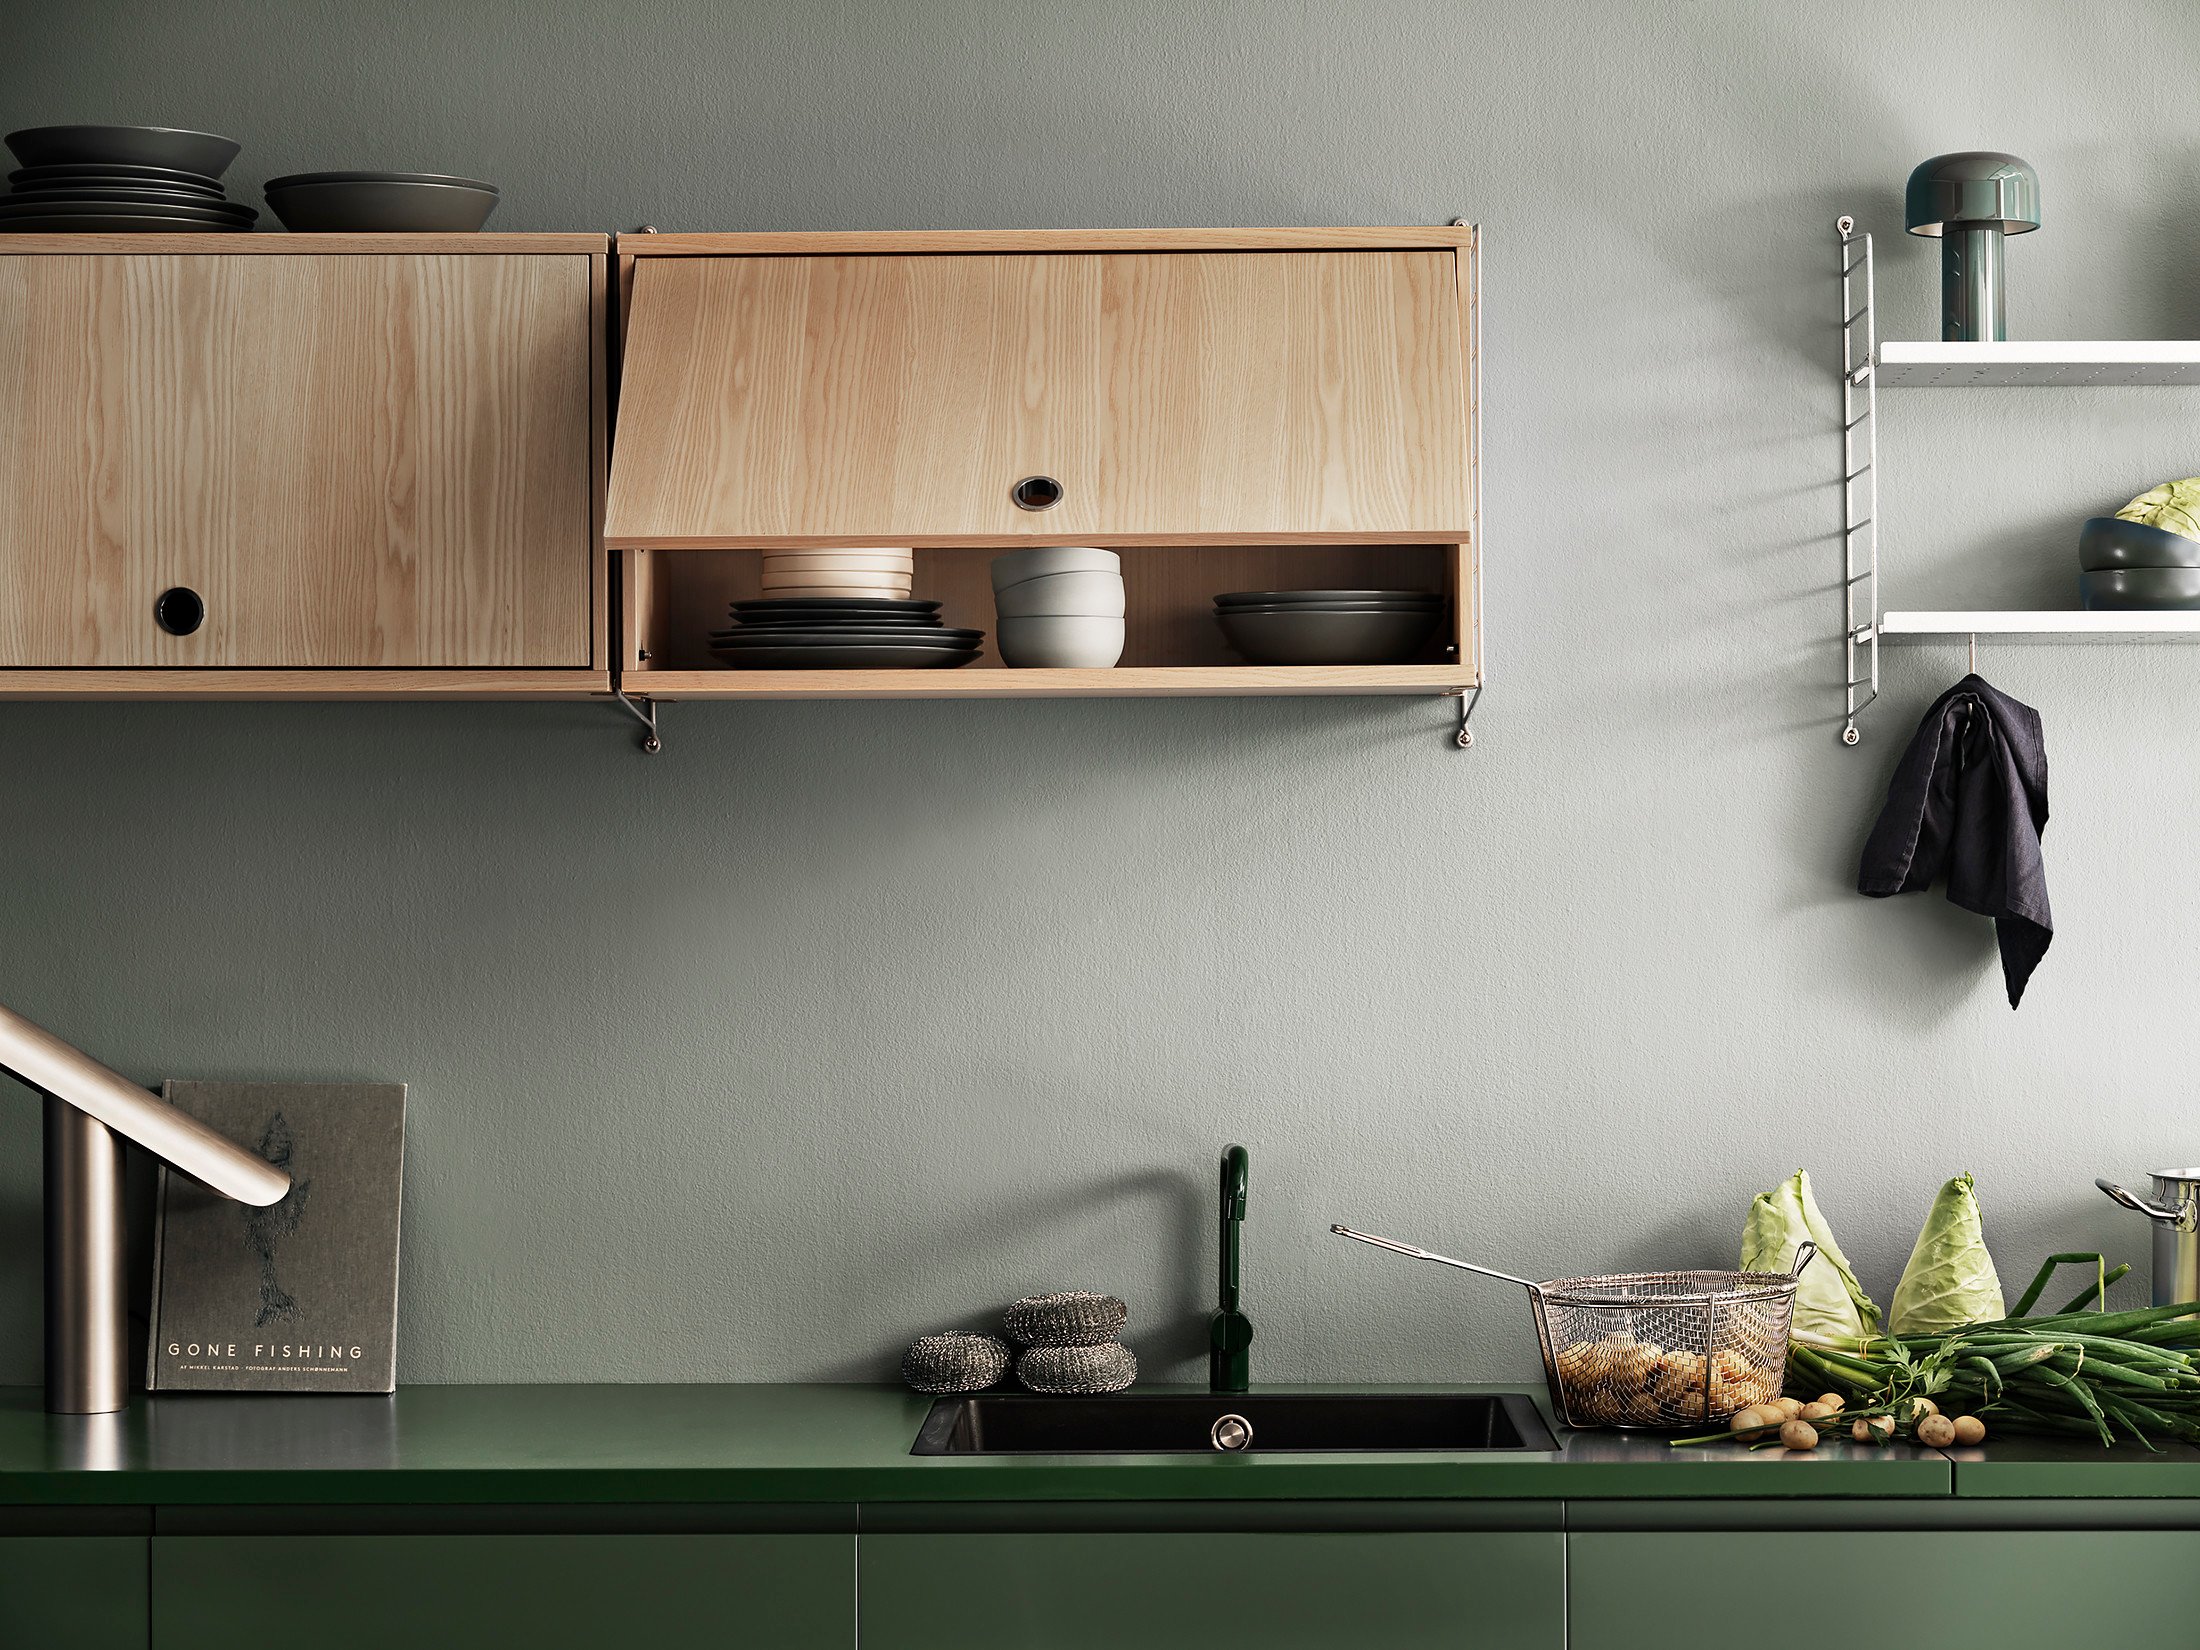 Add a cabinet with flip door for smart kitchen storage. The door opens towards the ceiling to avoid being in your way while cooking.